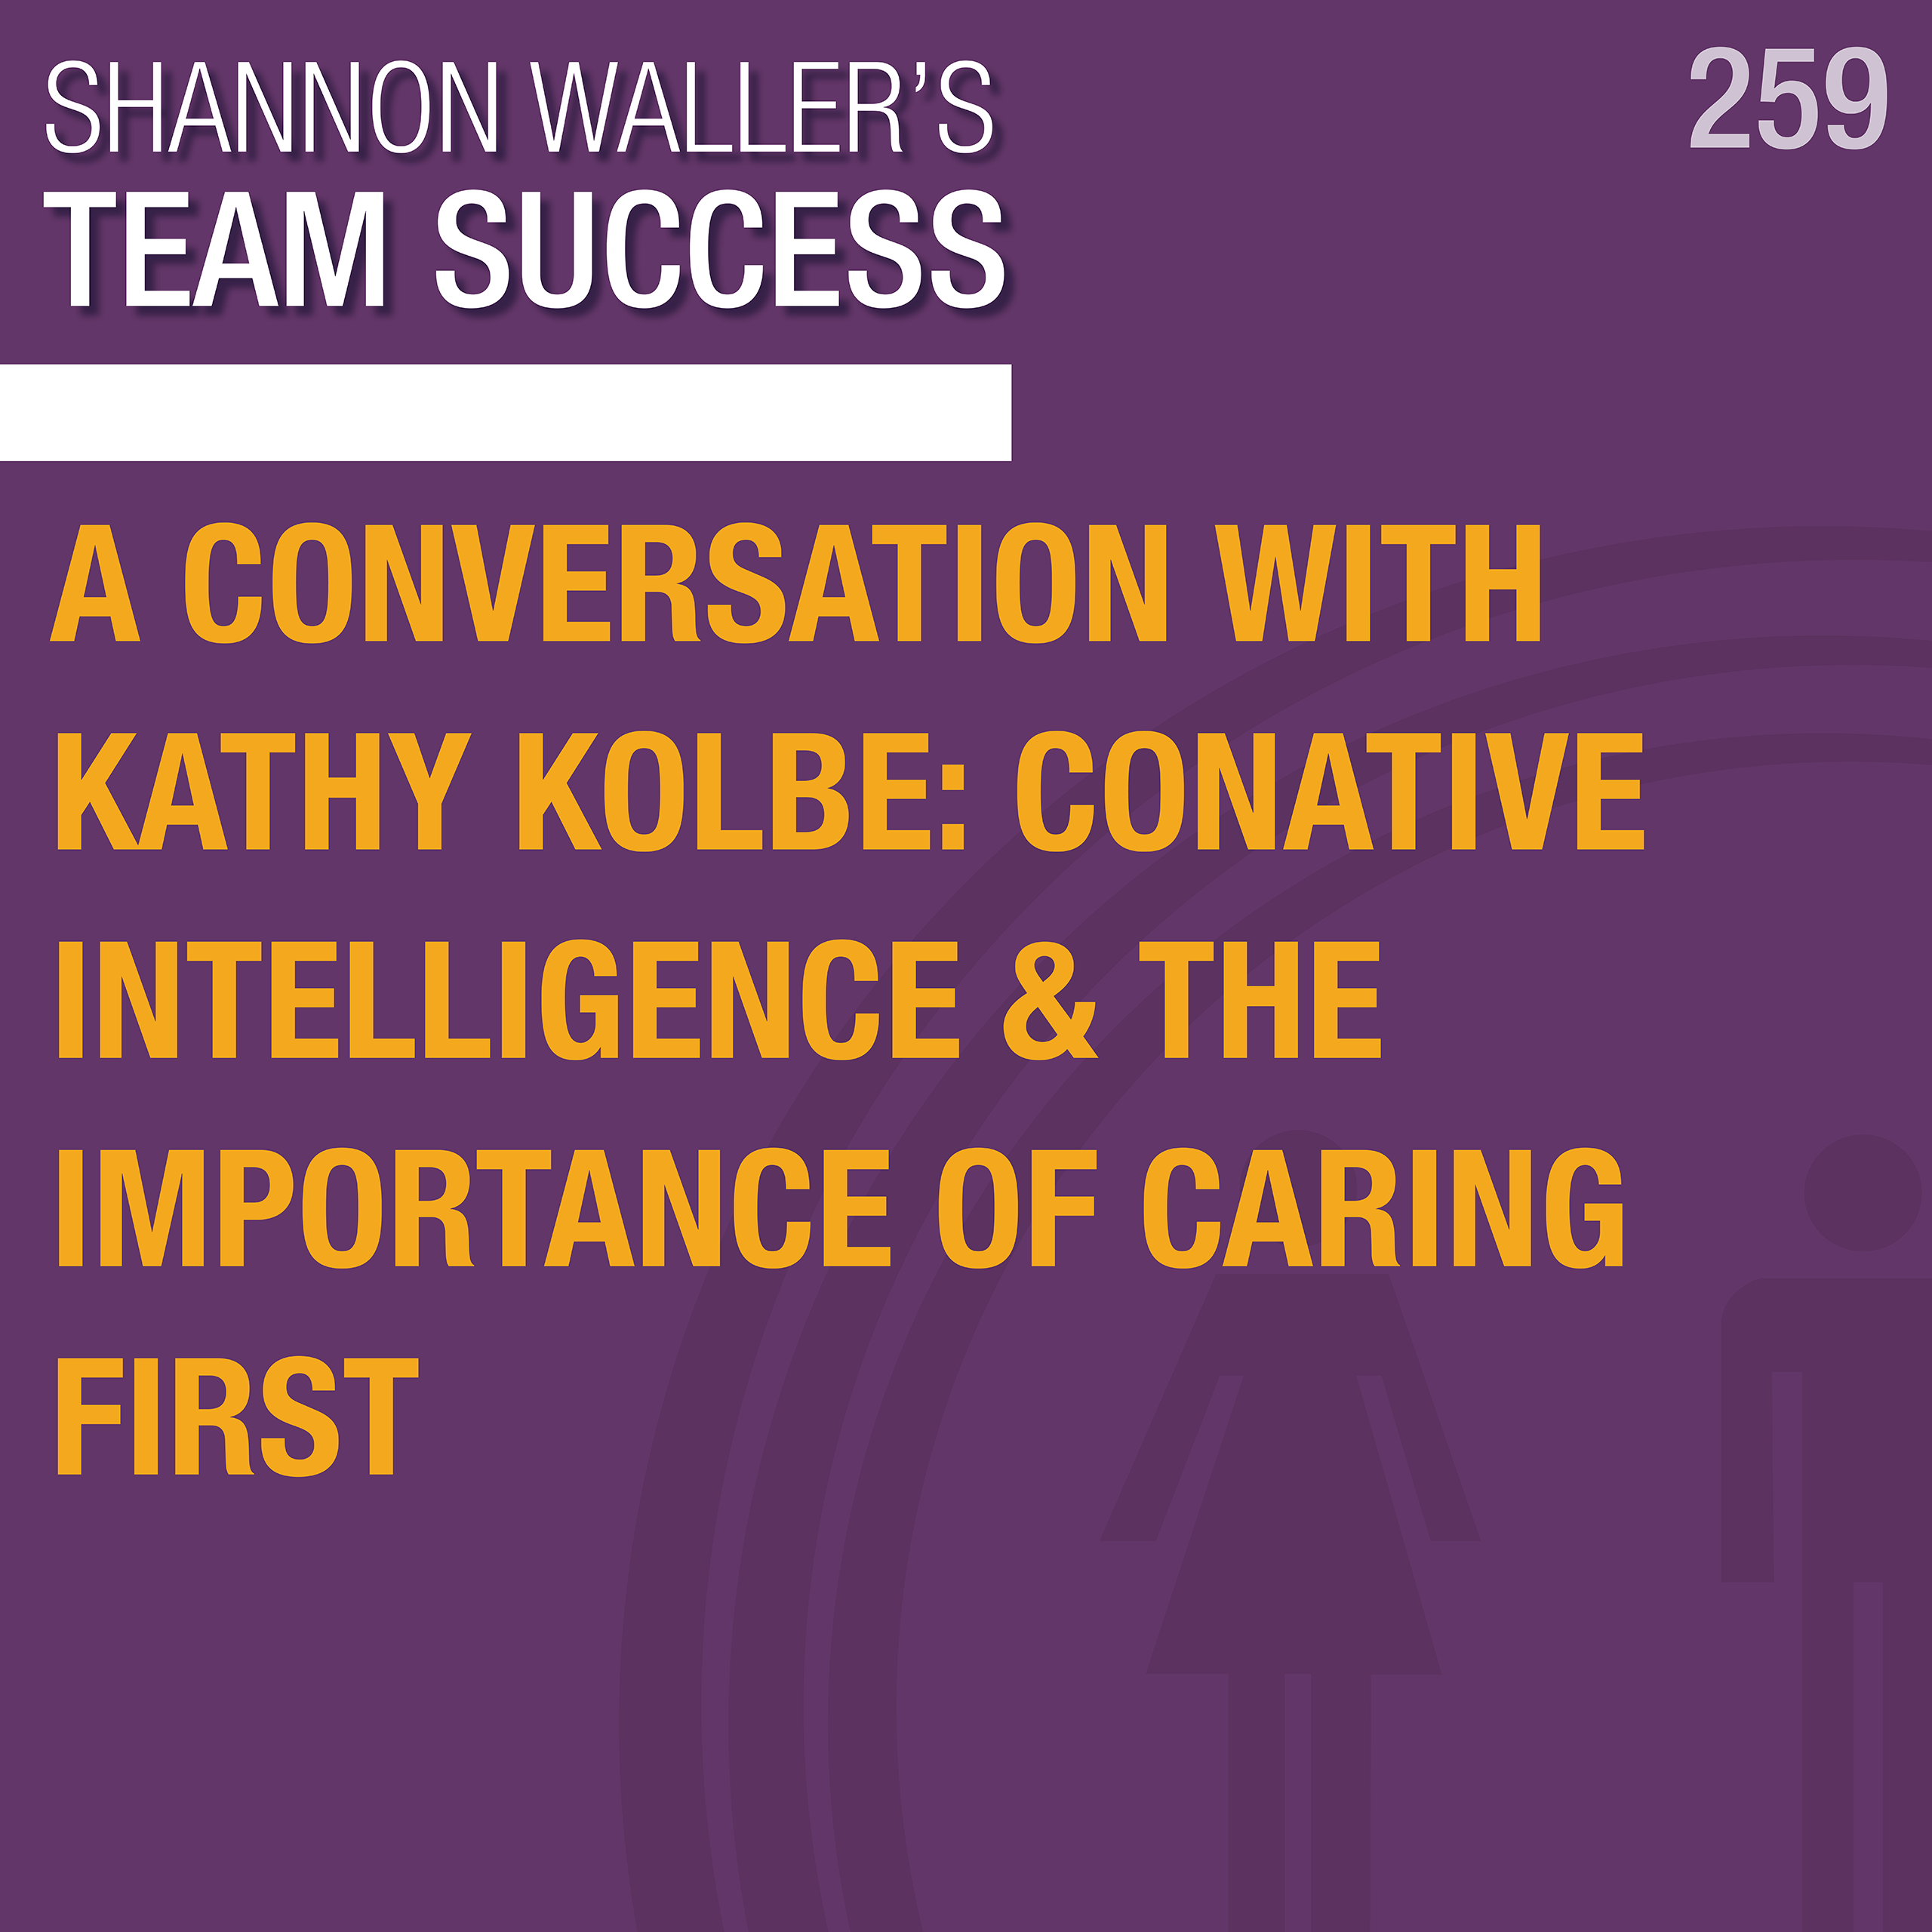 TeamSuccessPodcast_AConversationWithKathyKolbe_ep259.png